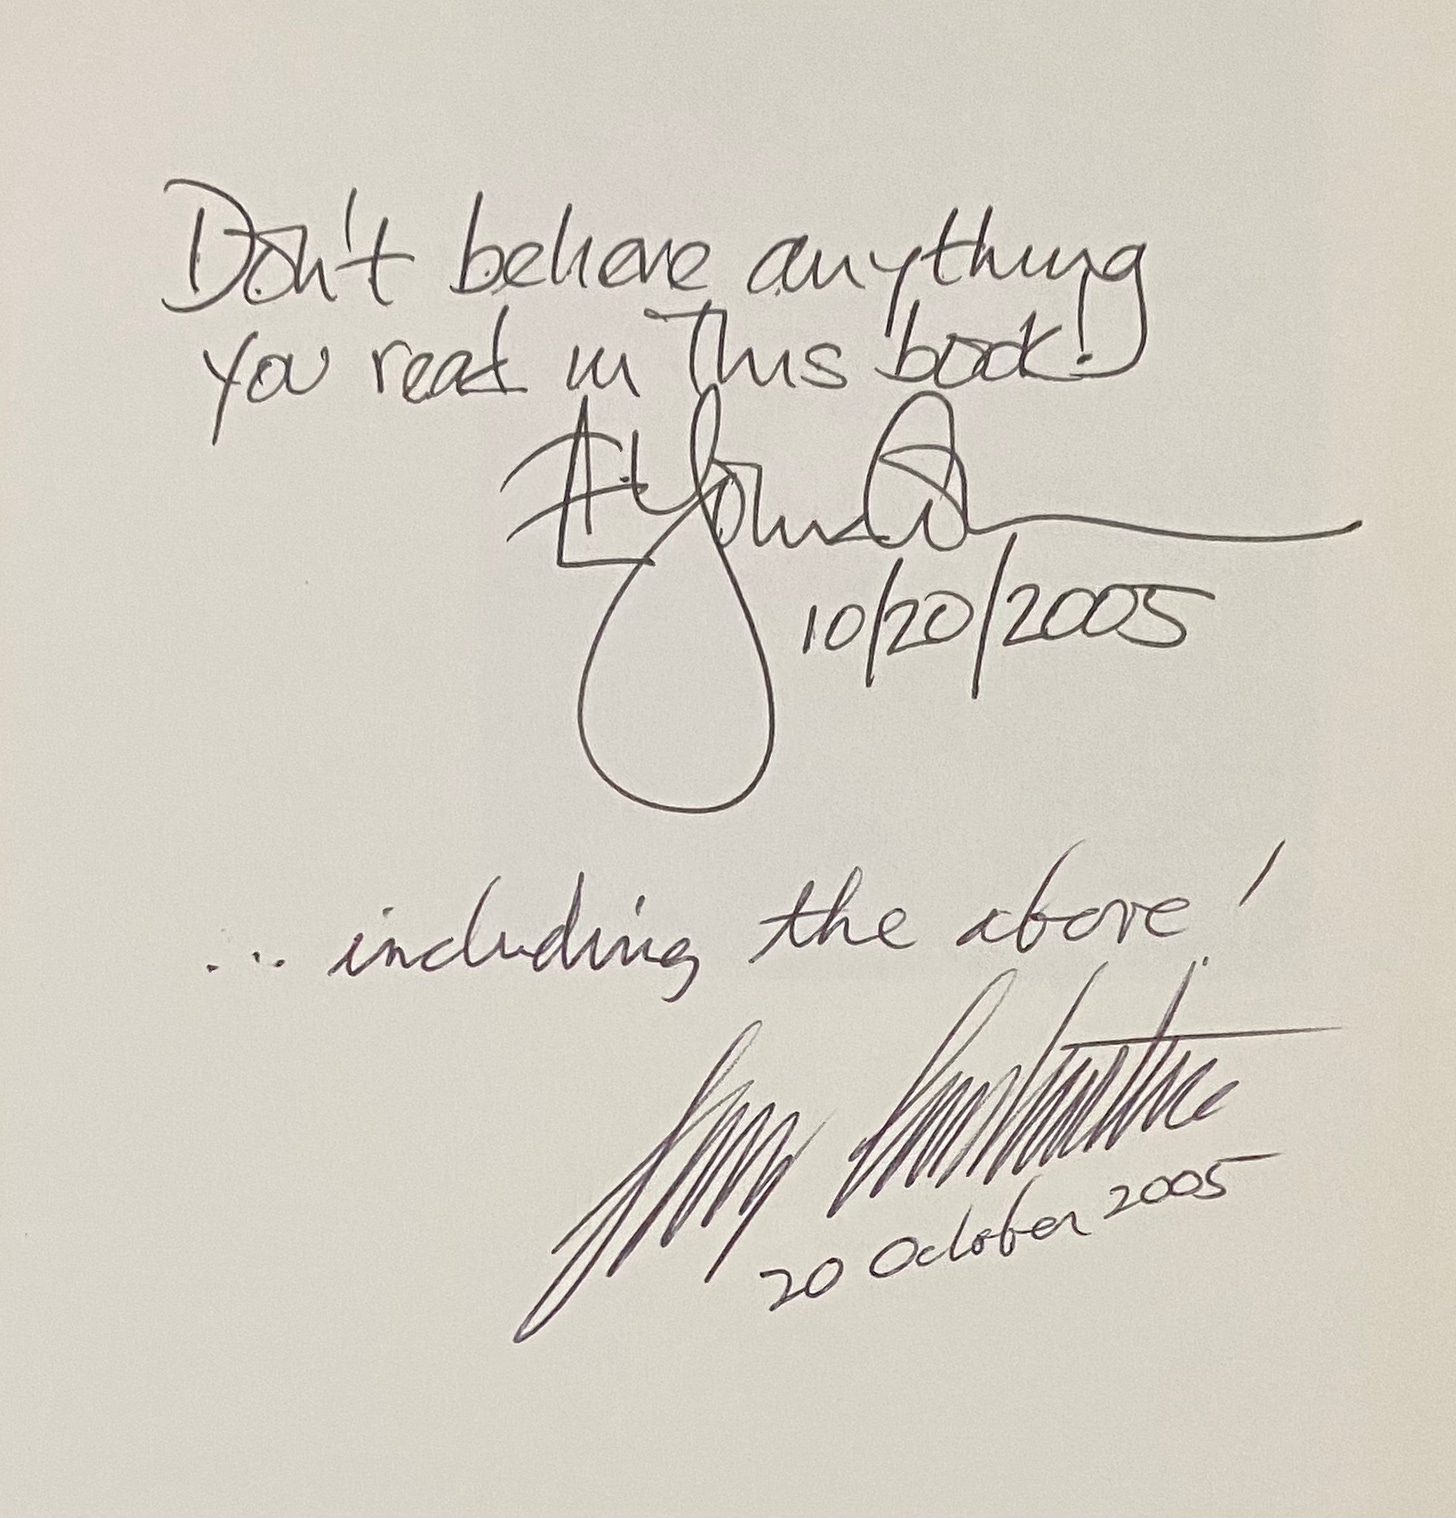 Hand written: "Don't believe anything you read in this book". "...including the above."